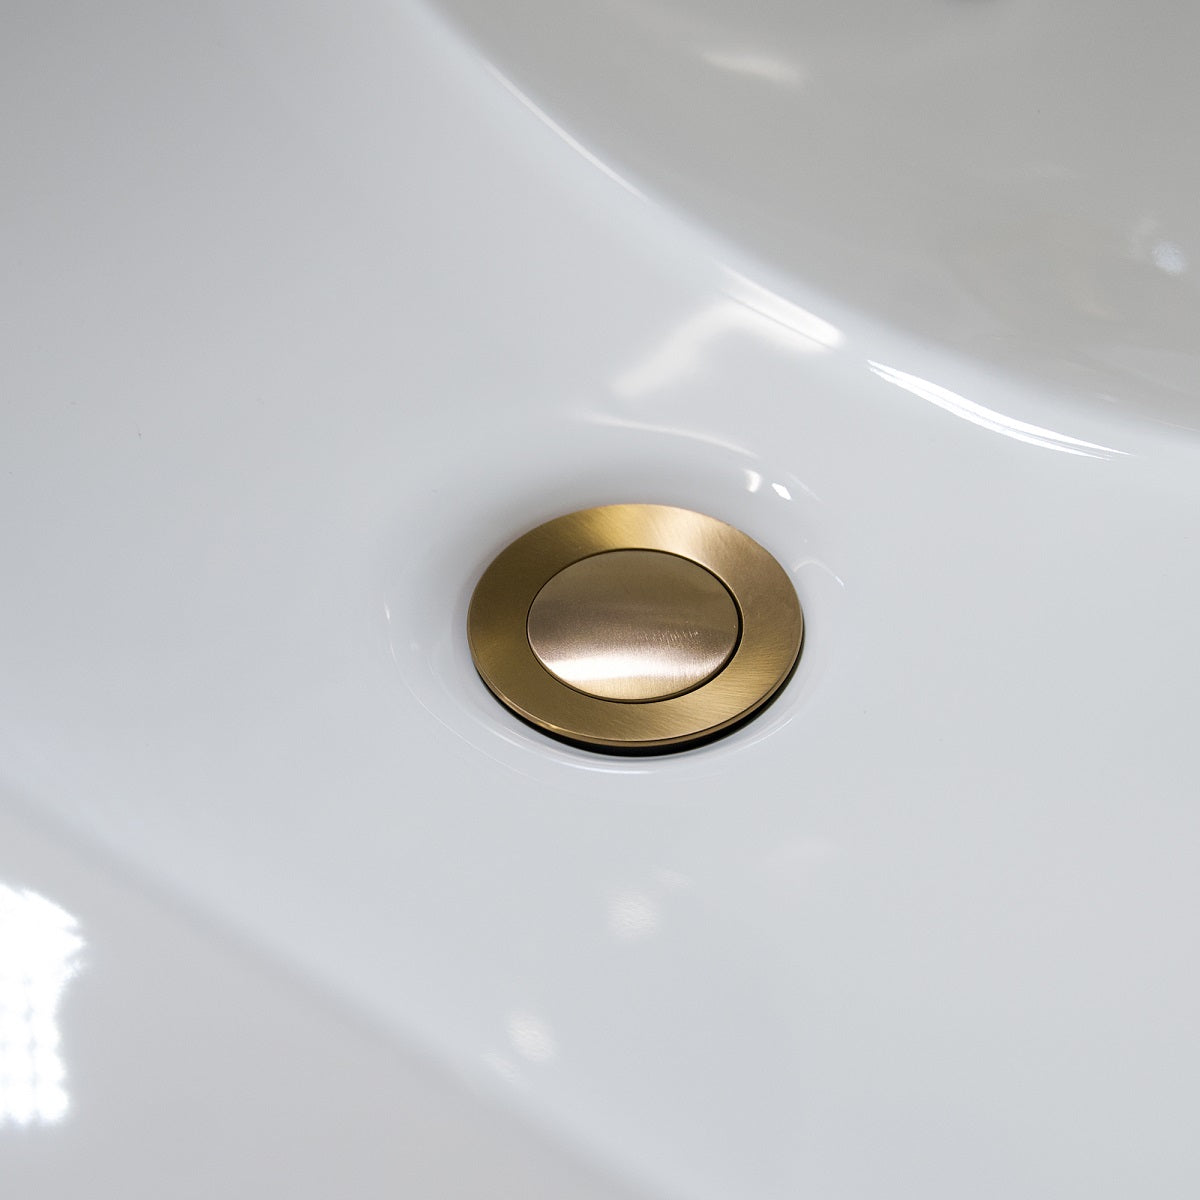 Bathroom sink pop-up drain without overflow Brushed Gold